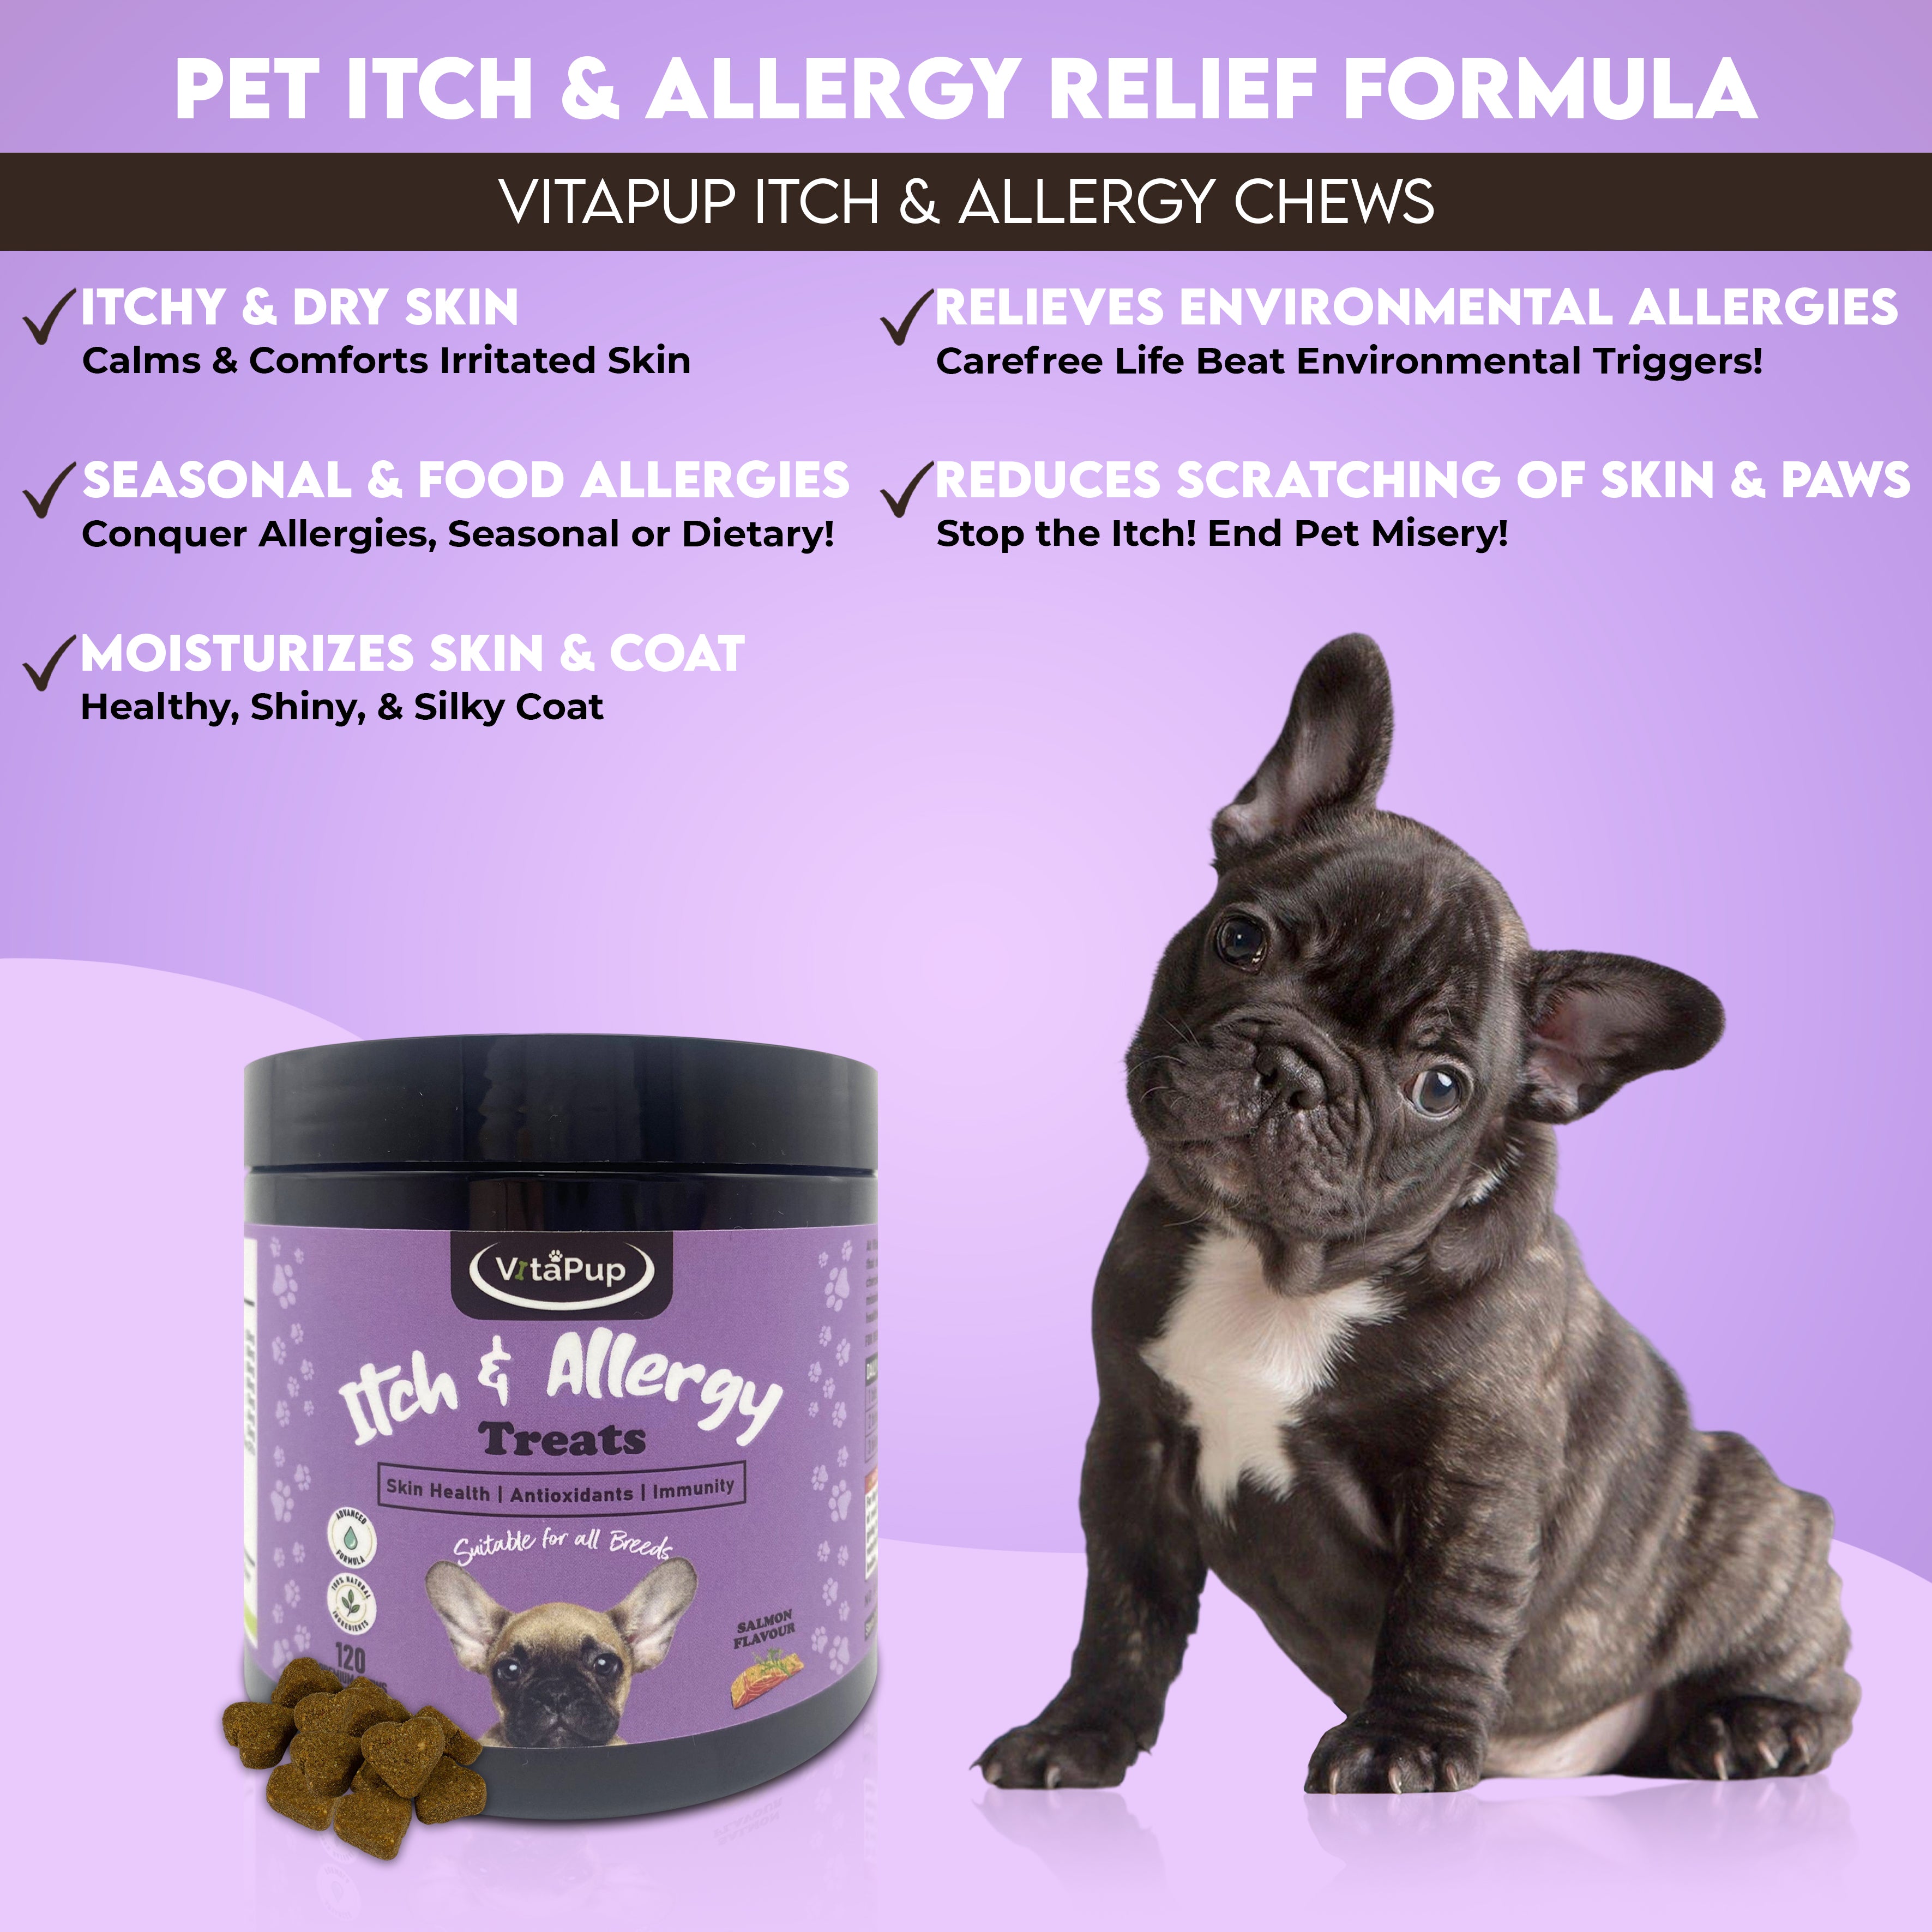 VitaPup Itch & Allergy Relief Dog Treats